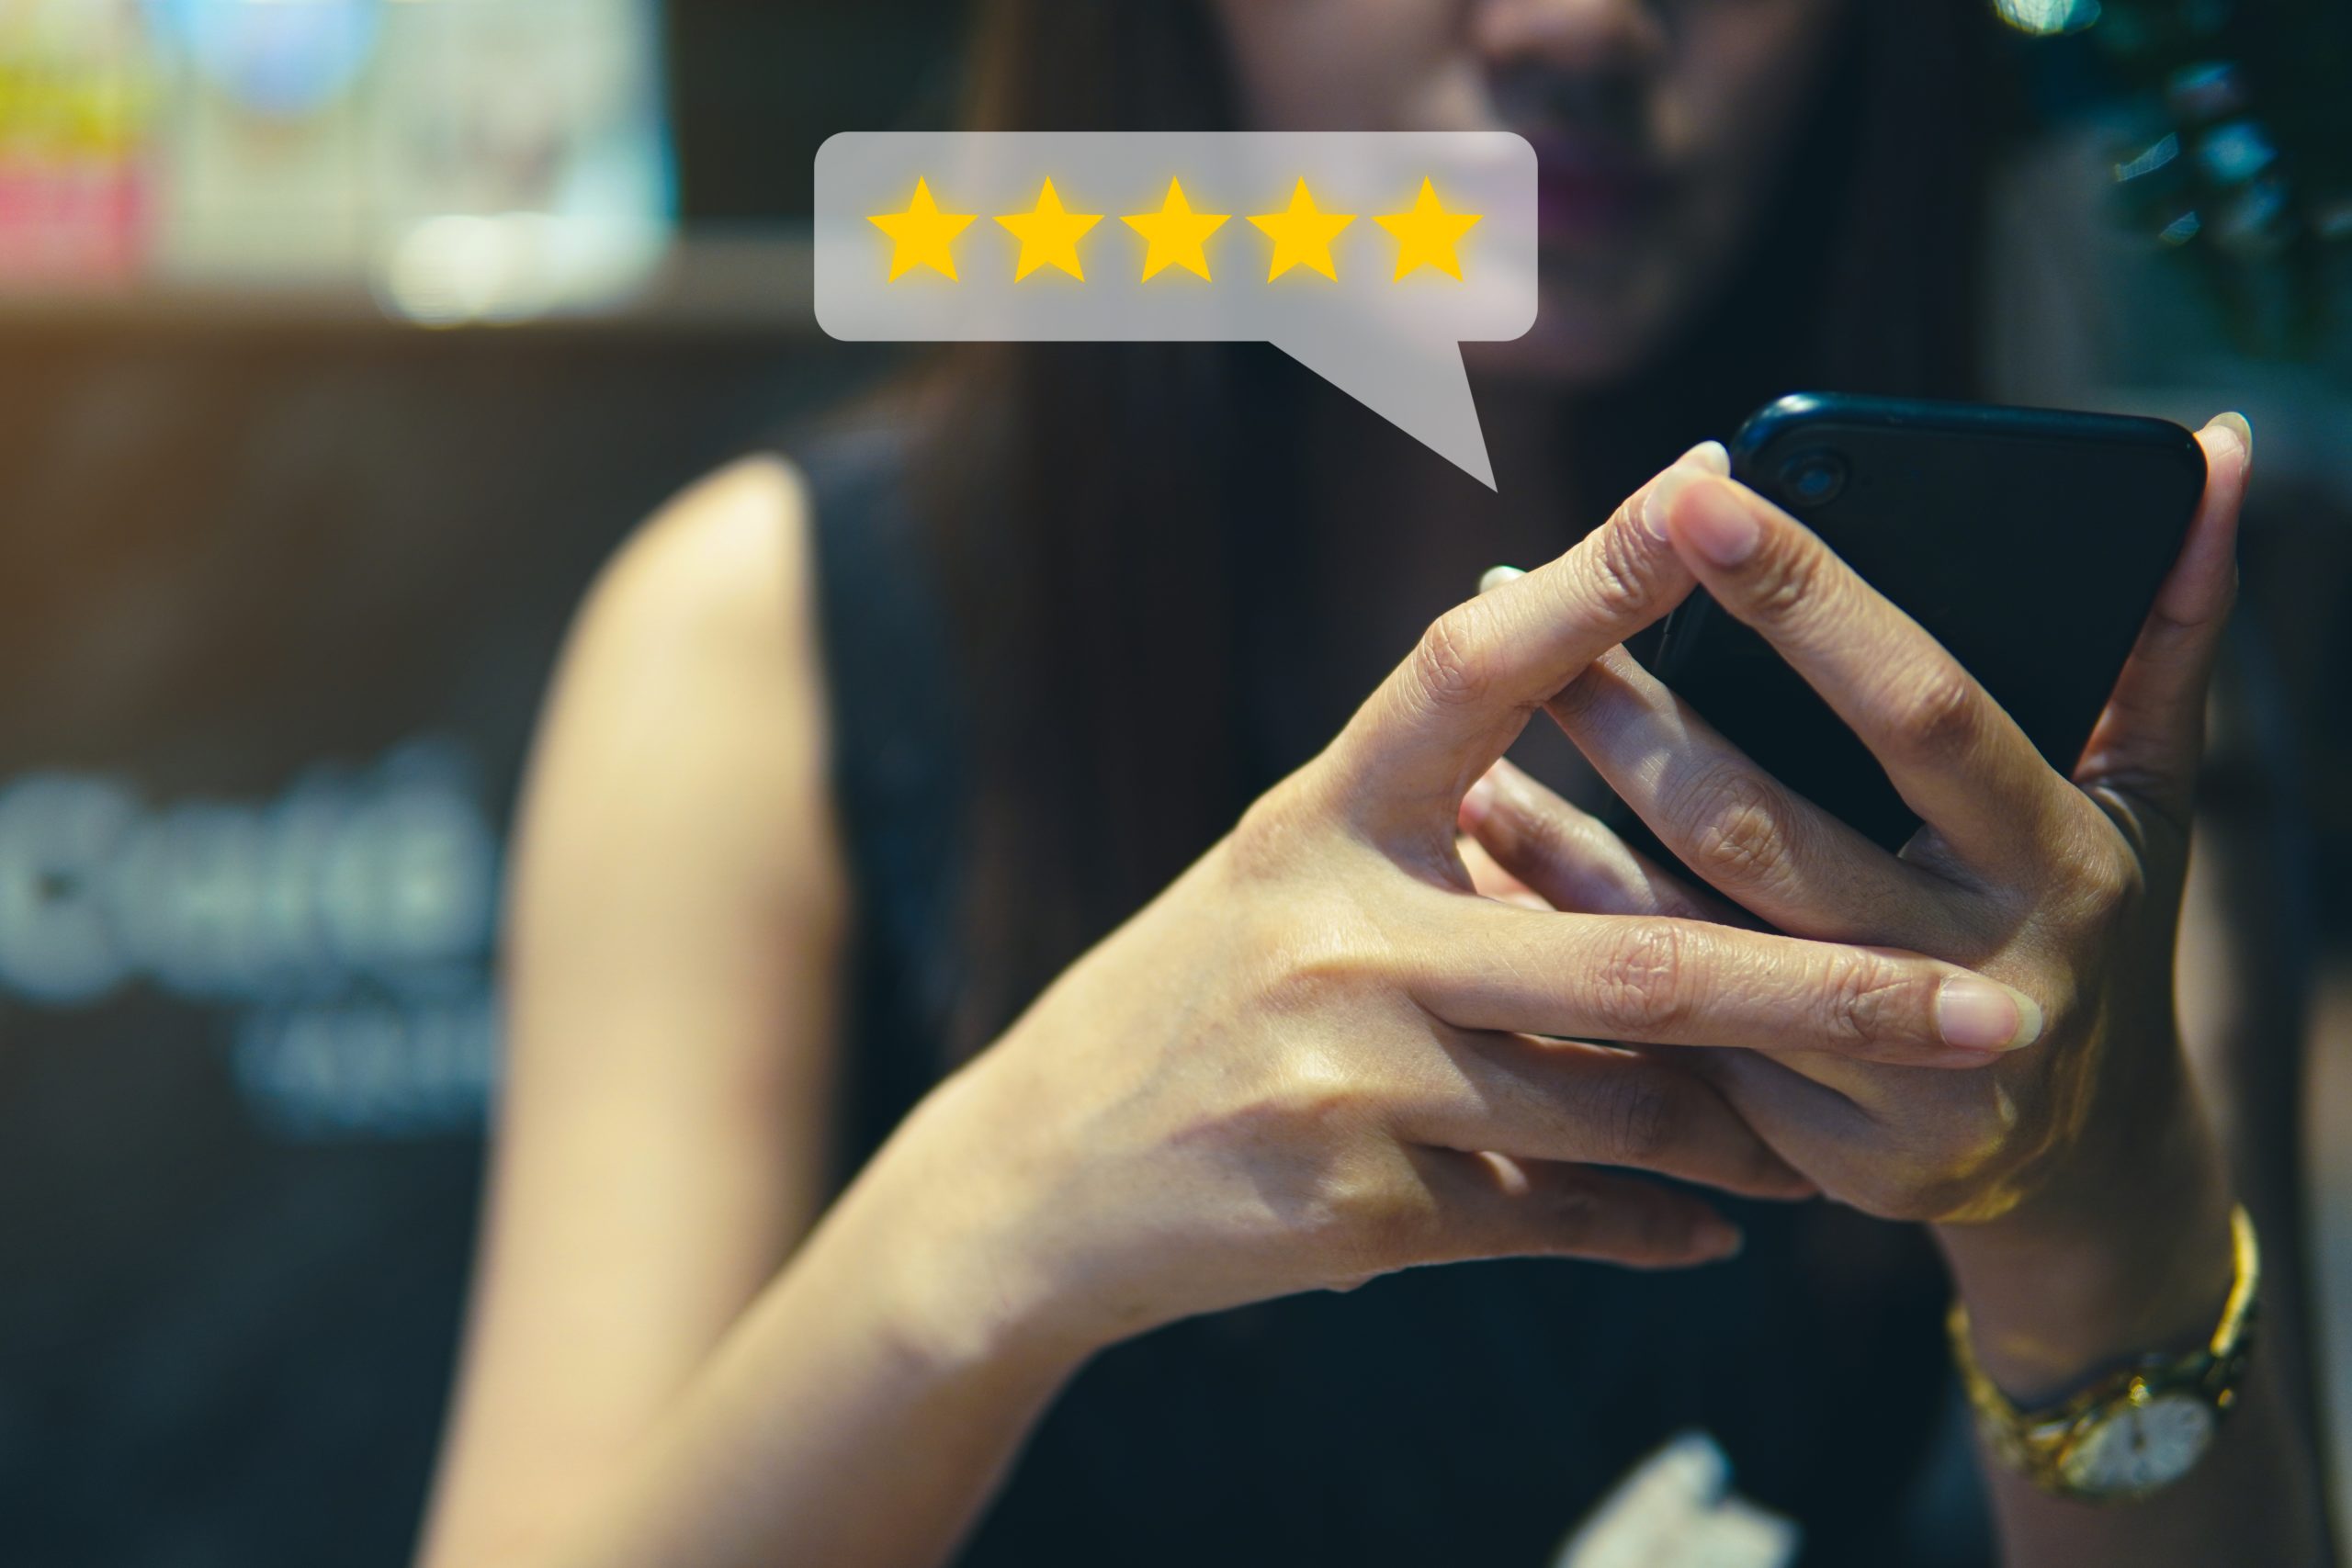 Reviews, testimonials, and social media are a great way to show social proof